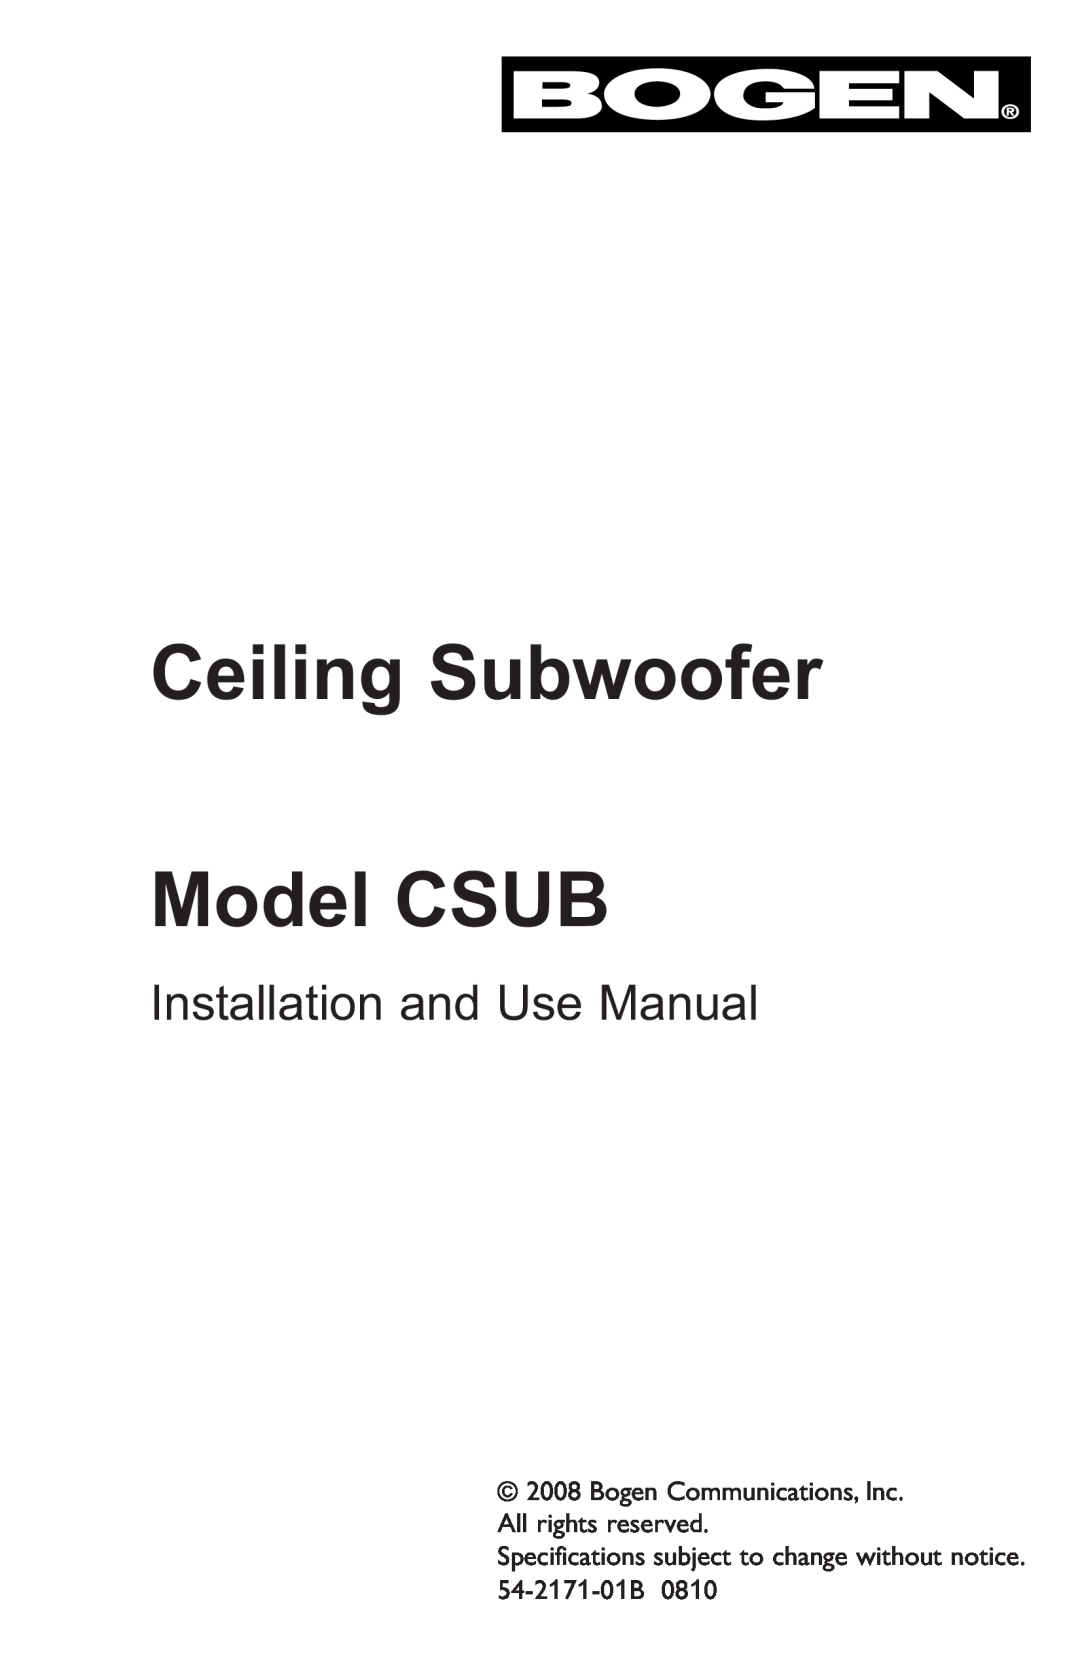 Bogen specifications Ceiling Subwoofer Model CSUB, Installation and Use Manual 